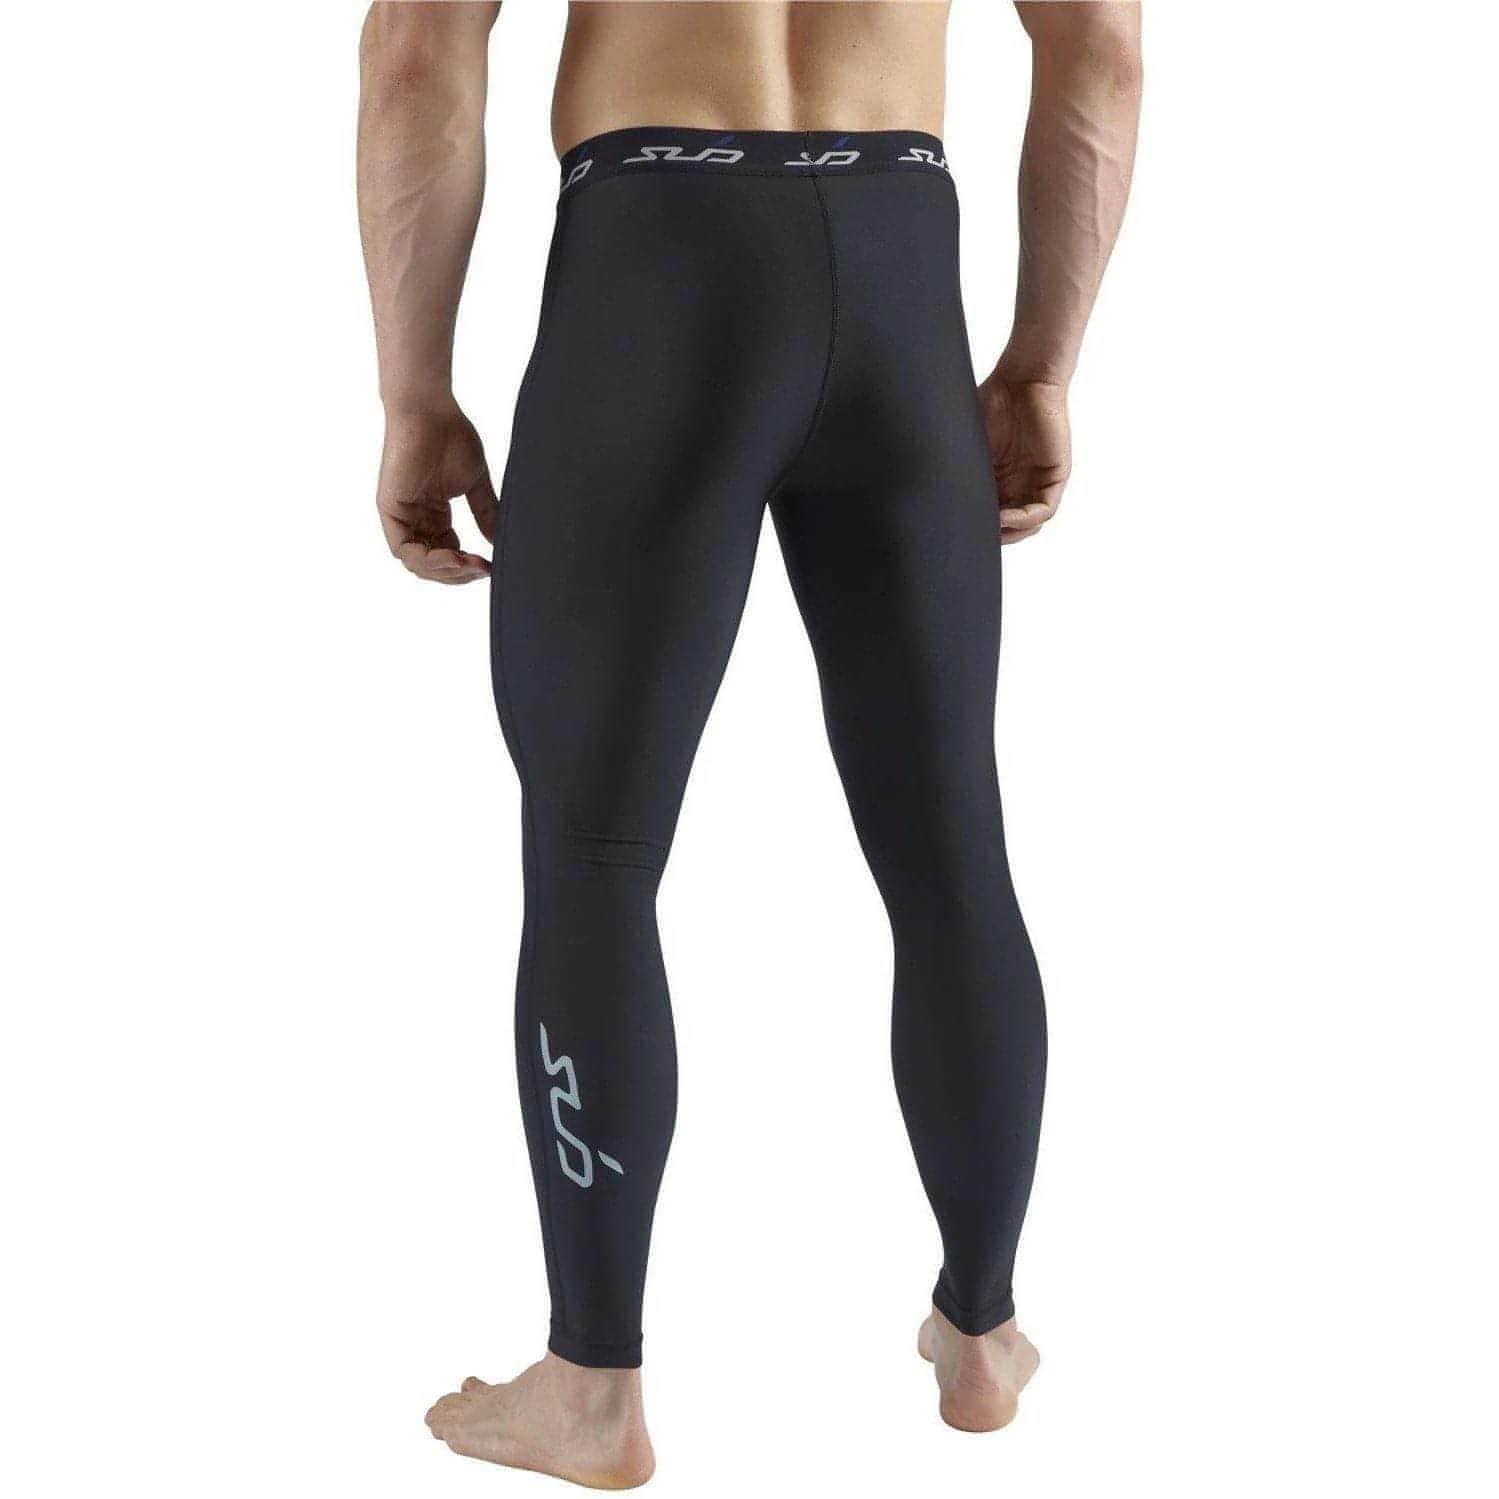 Sub Sports Cold Mens Compression Long Tights - Black - Start Fitness